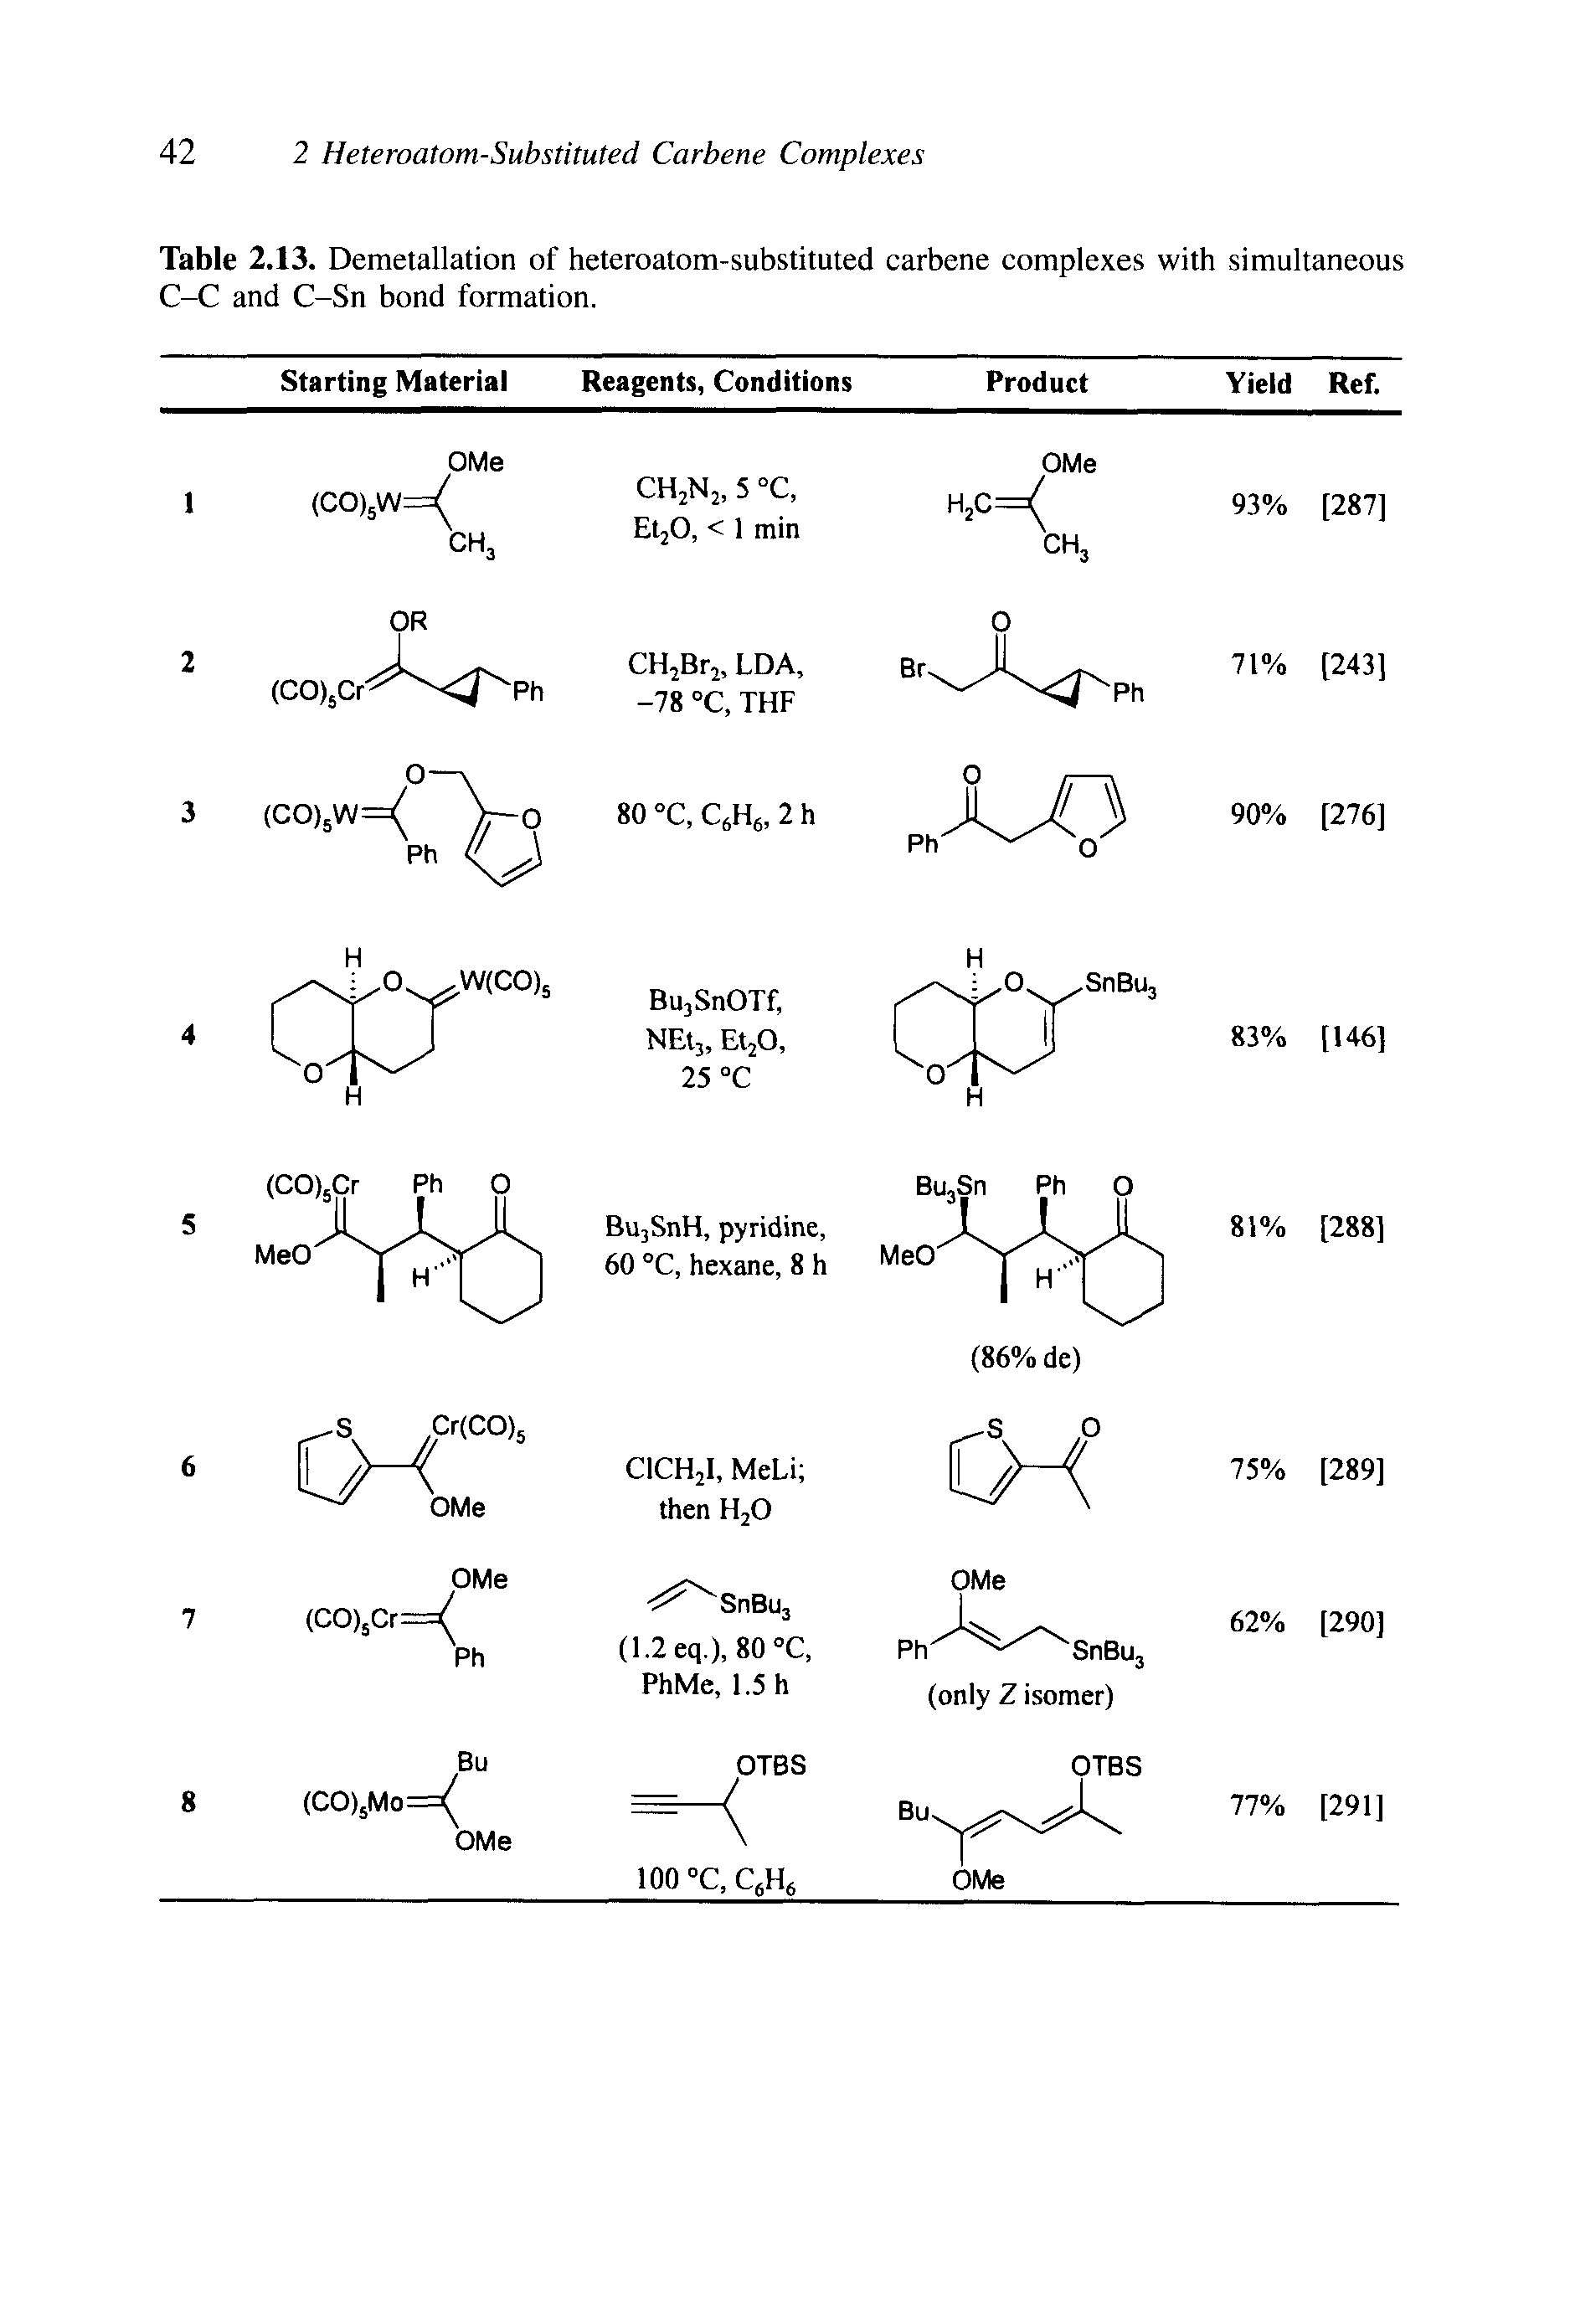 Table 2.13. Demetallation of heteroatom-substituted carbene complexes with simultaneous C-C and C-Sn bond formation.